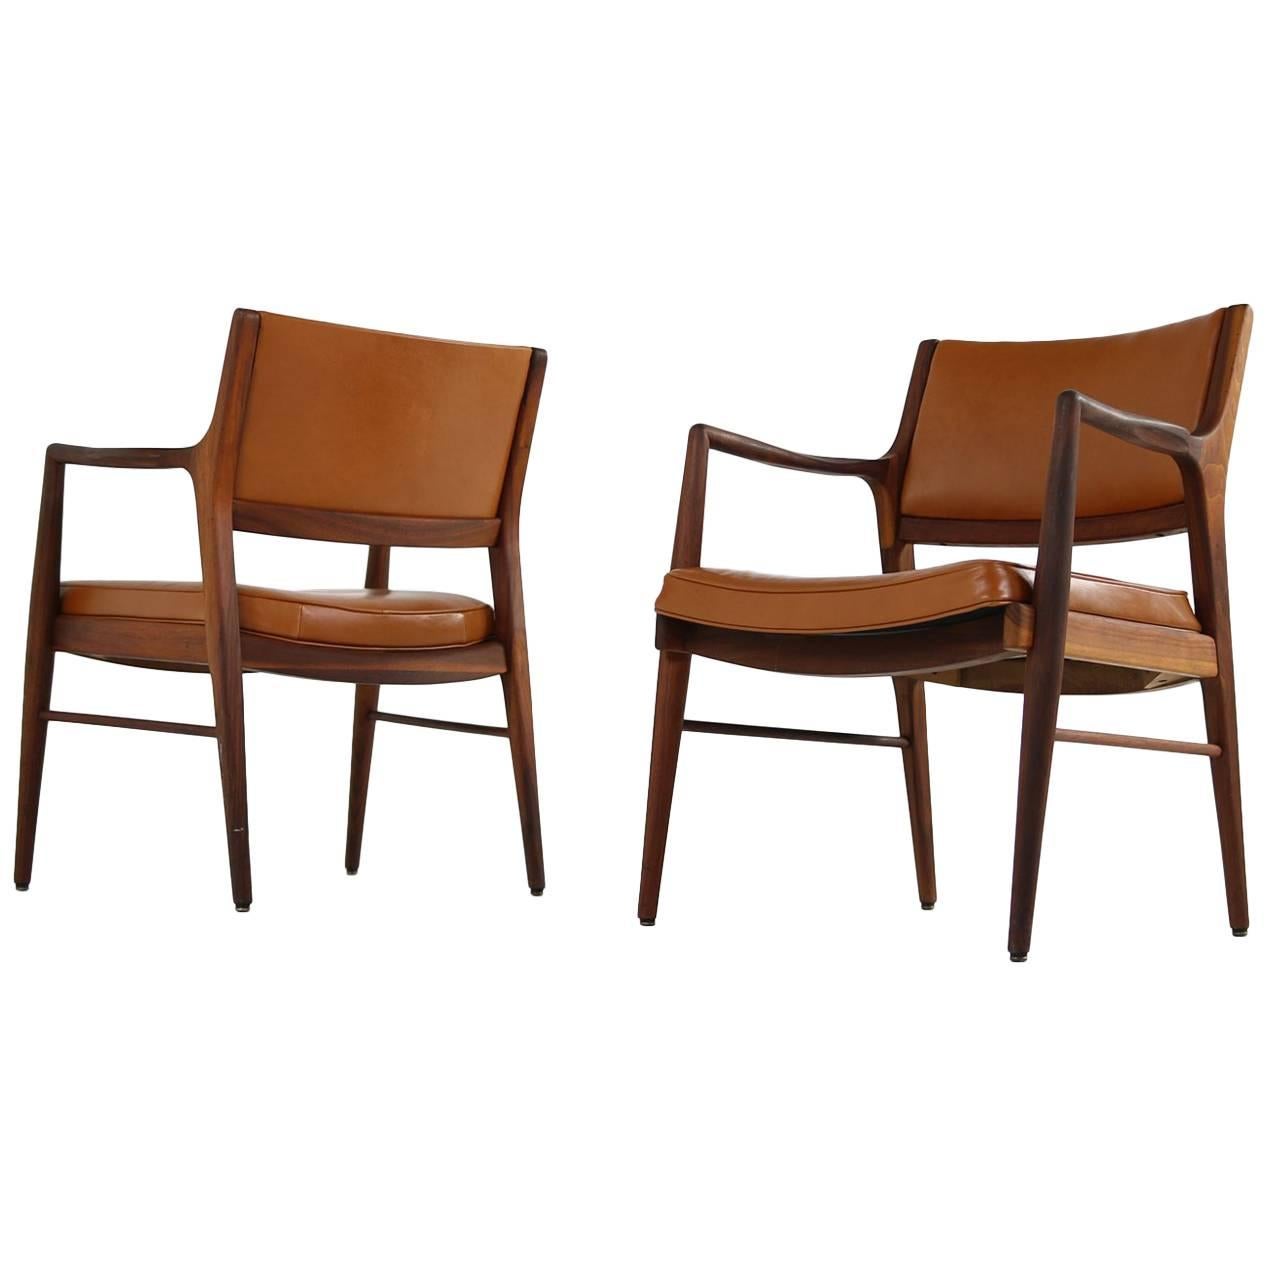 Pair of 1960s Solid American Walnut & Cognac Leather Lounge Chairs, MI 1961 U.S.